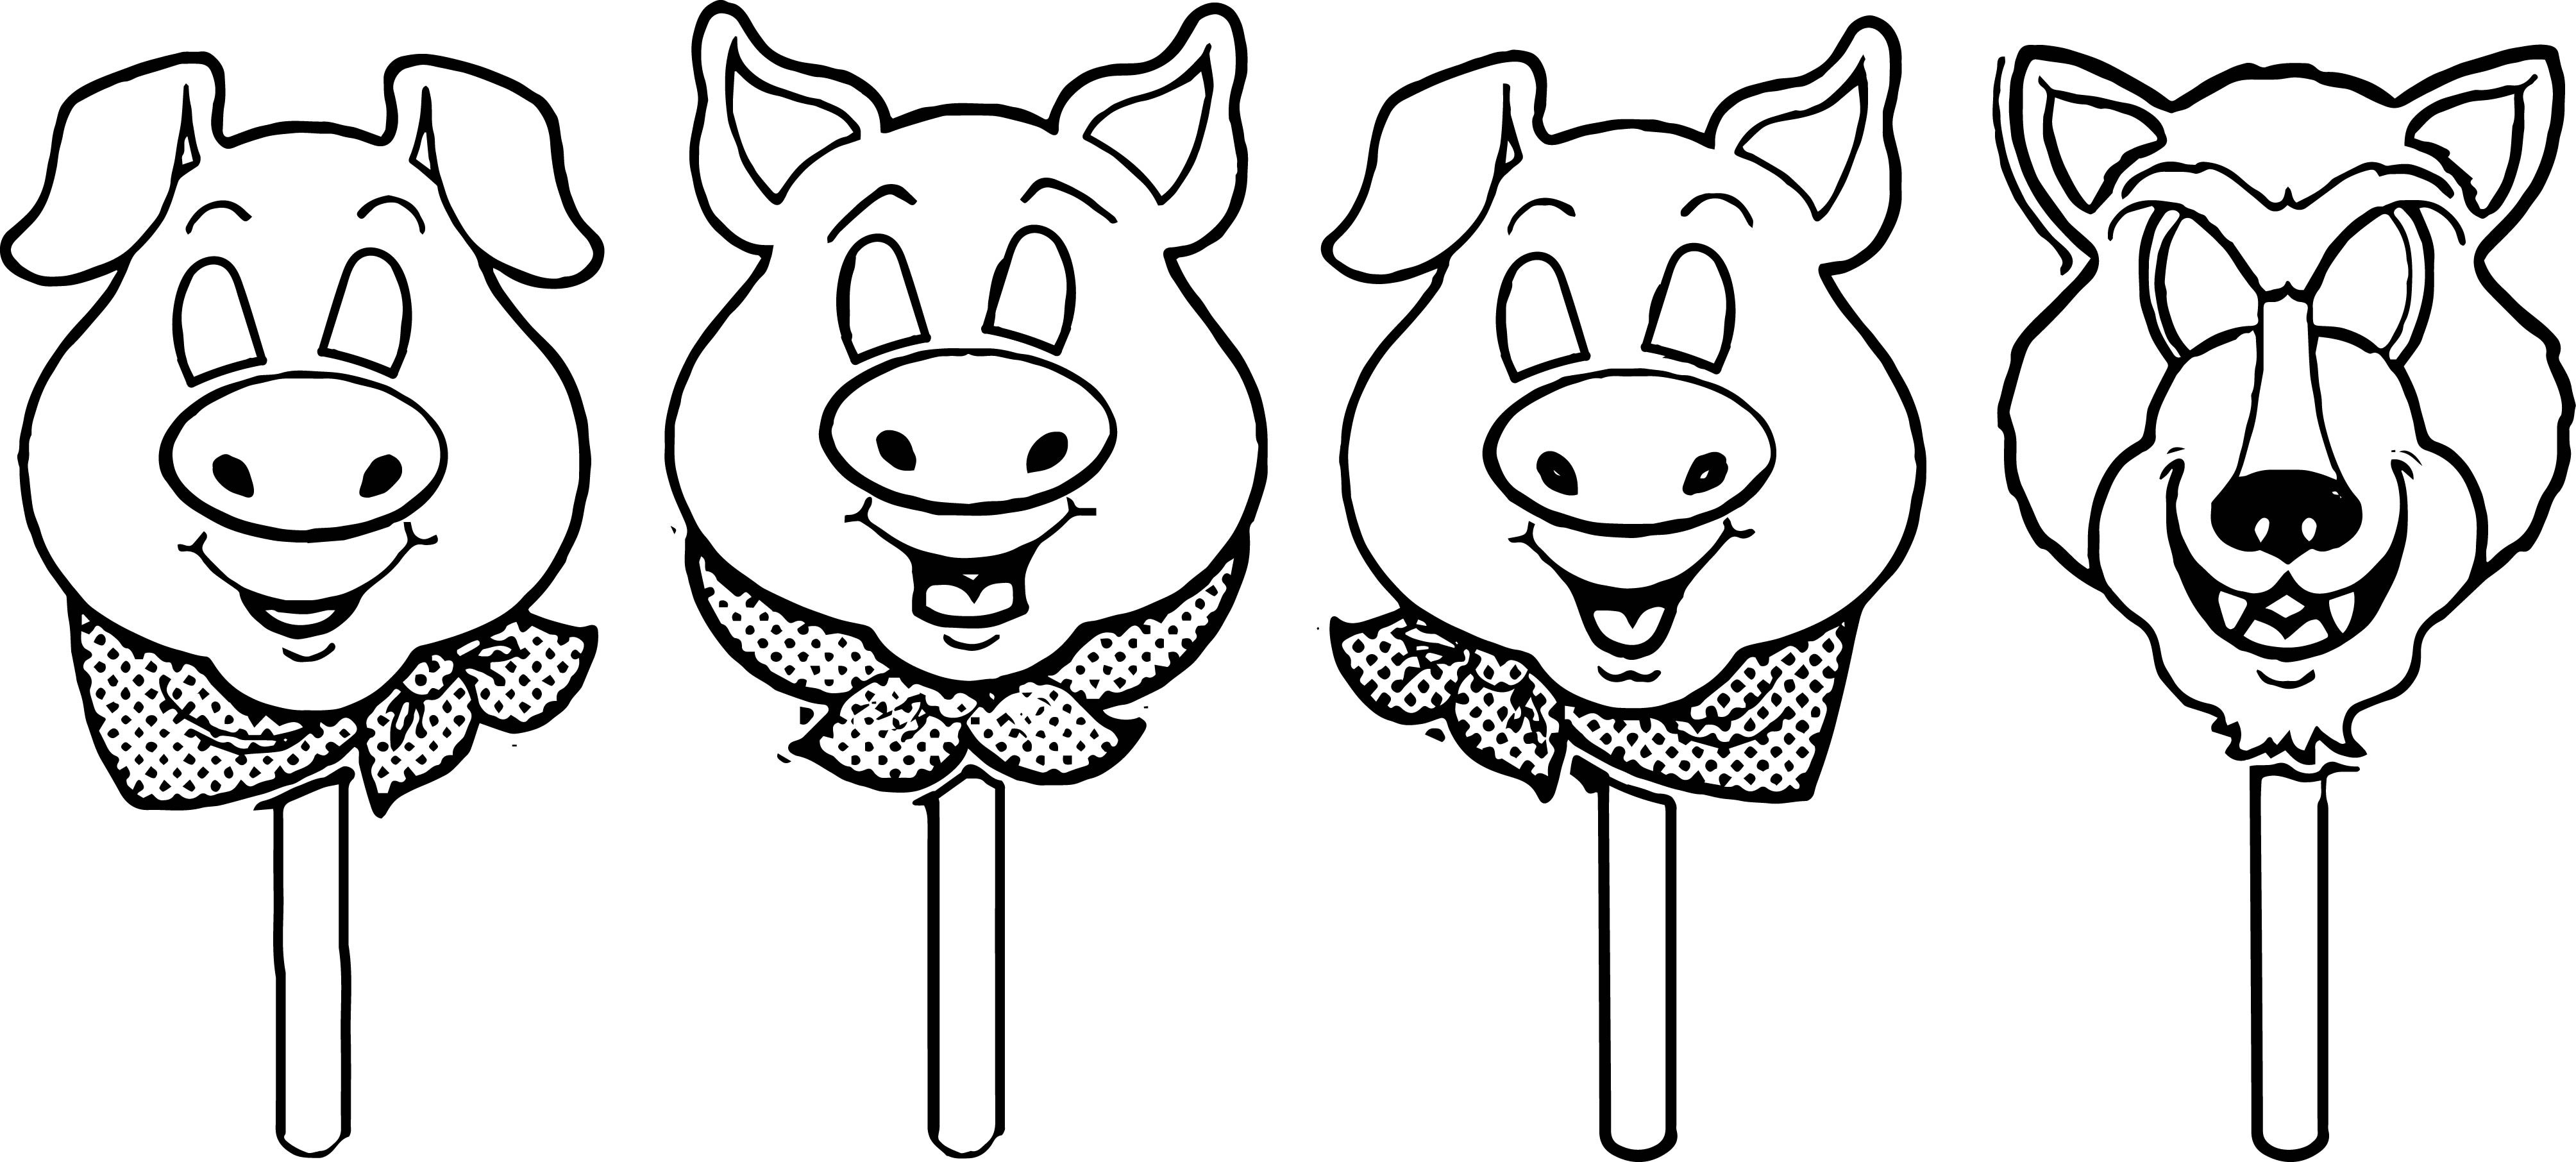 Preschool Coloring Sheets For The 3 Little Pigs Wolf Mask
 3 Little Pigs Mask Template Coloring Page